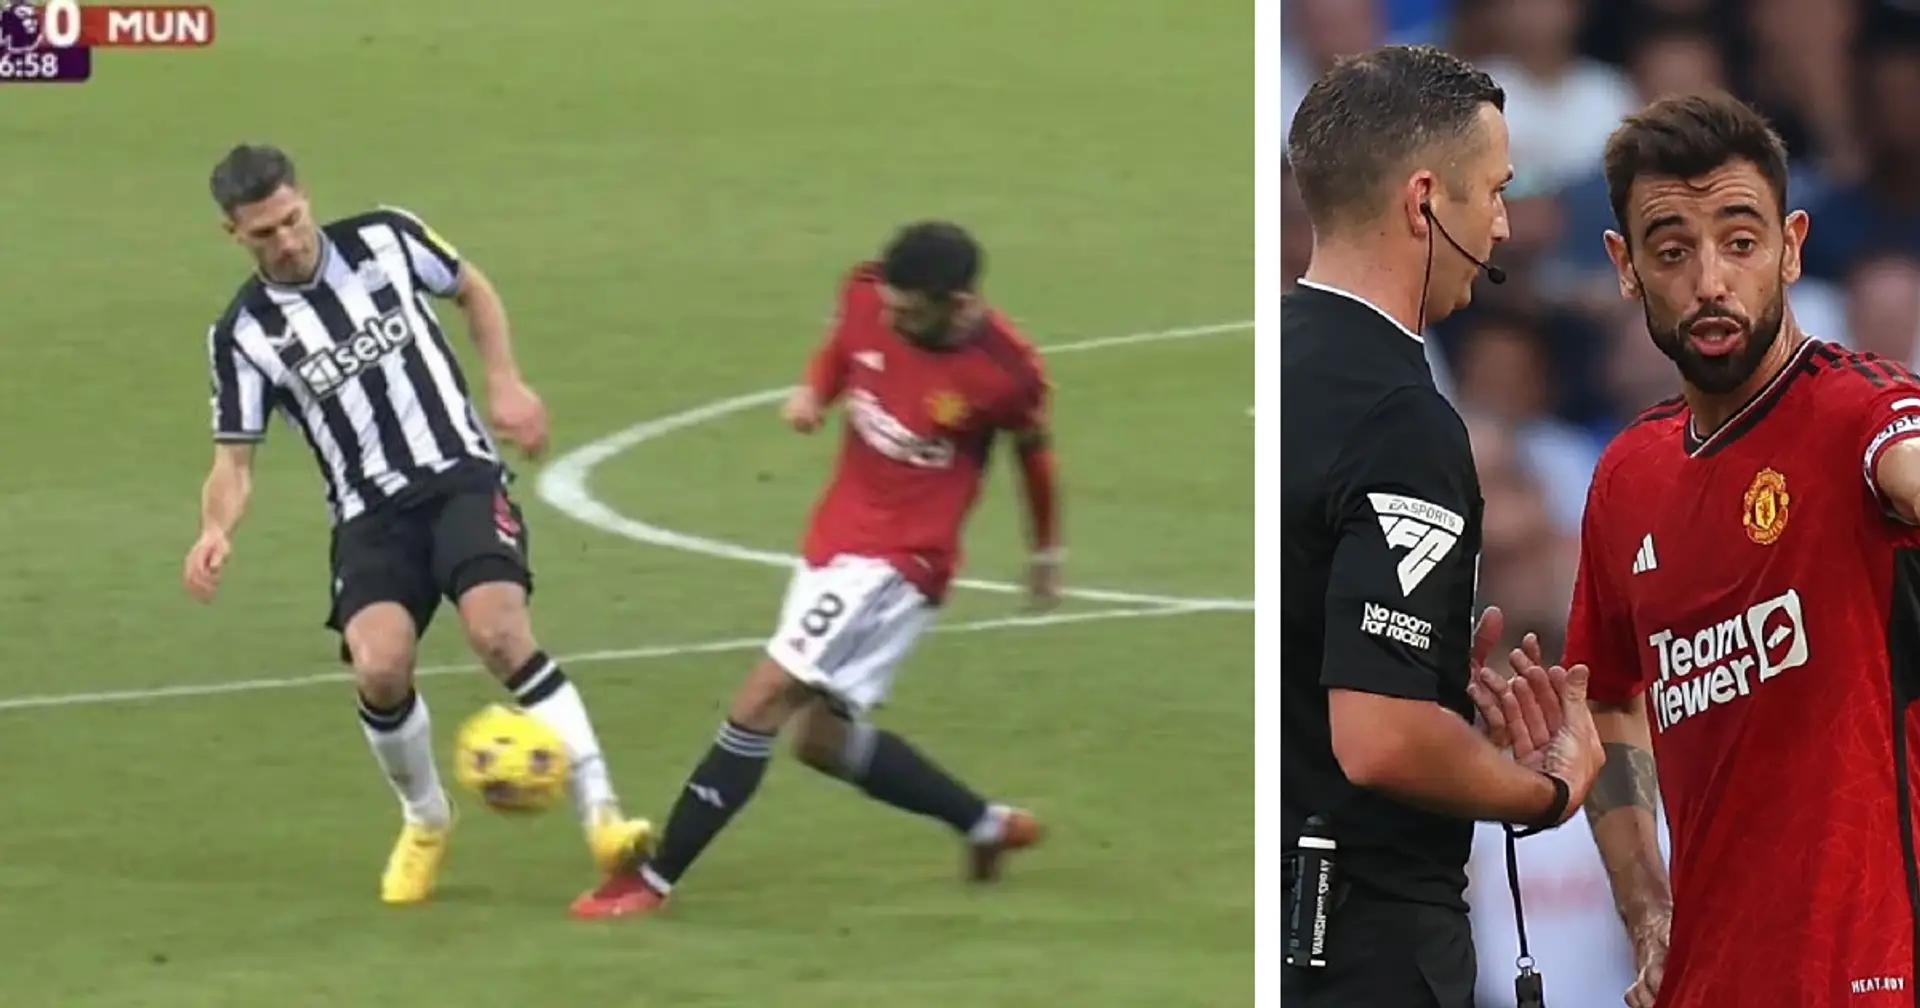 Fernandes 'stormed into referee's office' after Newcastle defeat - reason revealed 